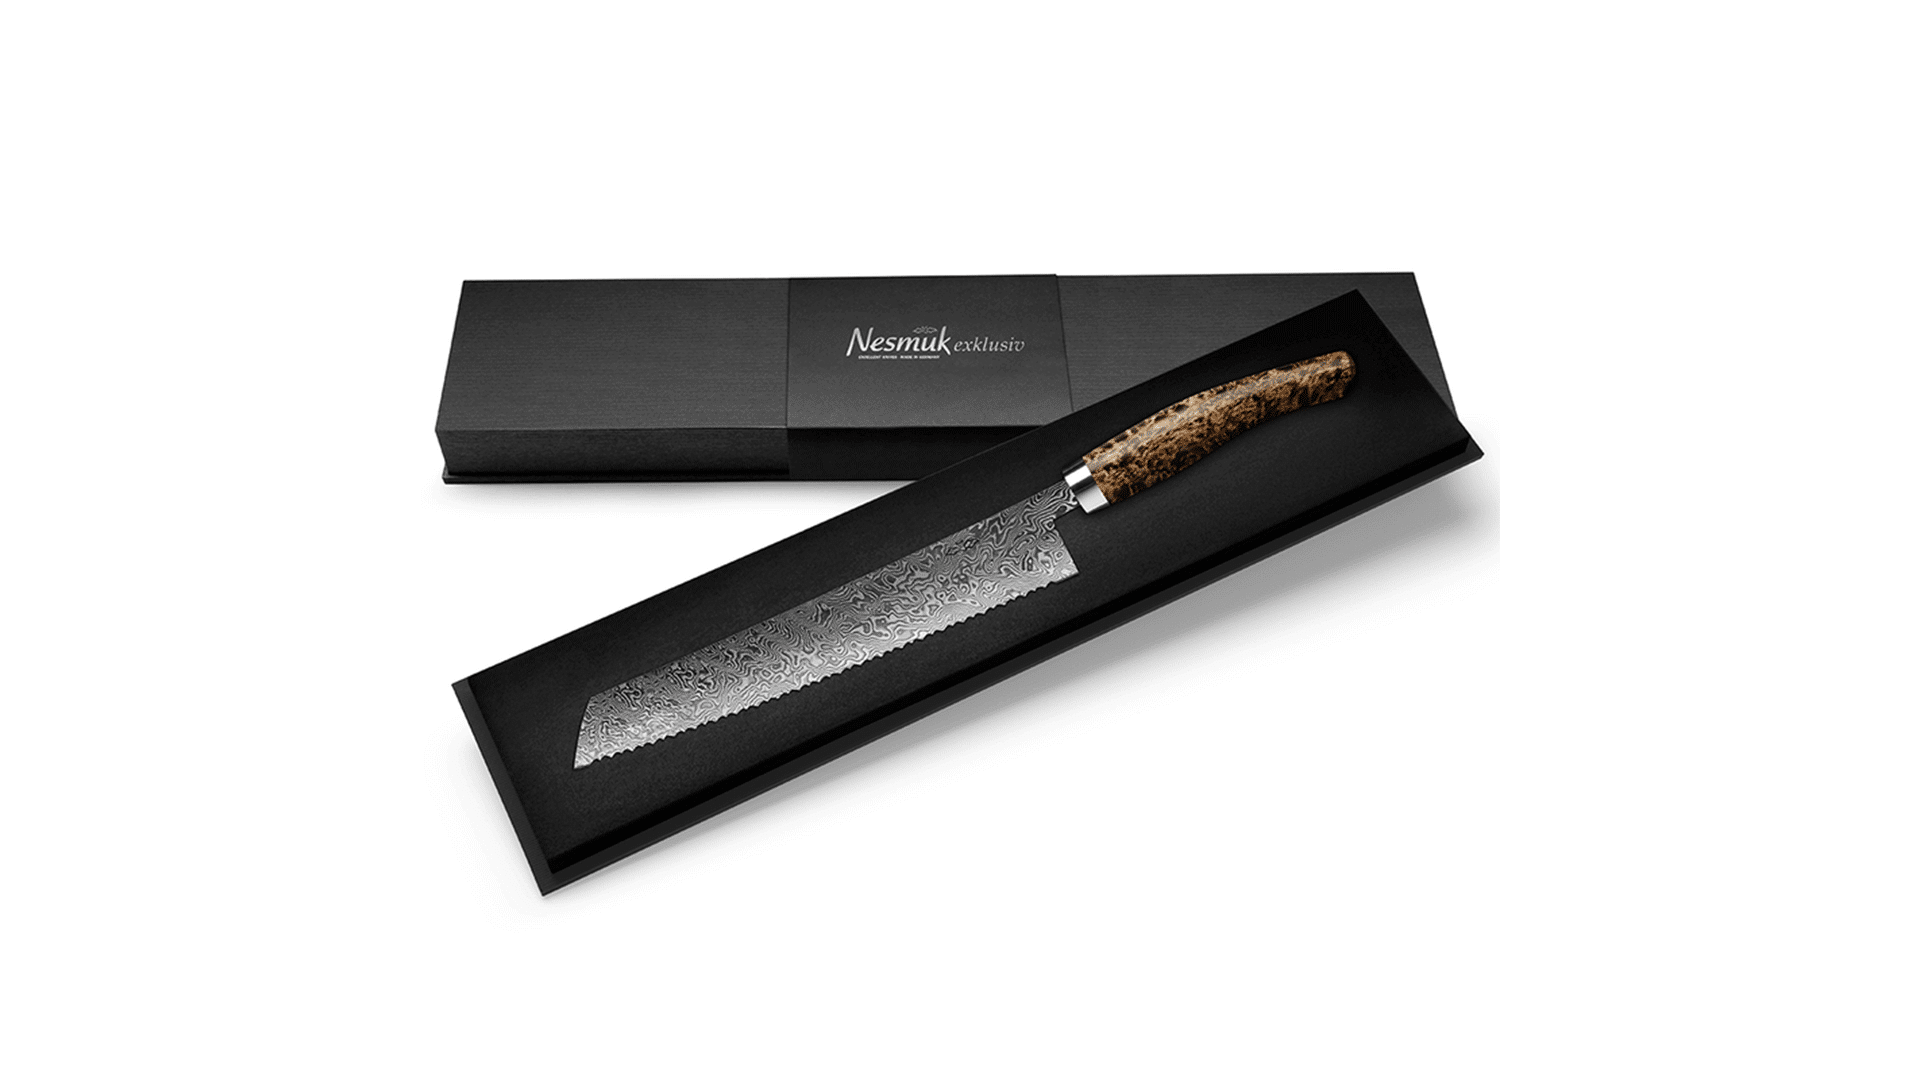 nesmuk-exclusive-bread-knife-270-karelian-curly-birch-from-solingen-noble-packaging